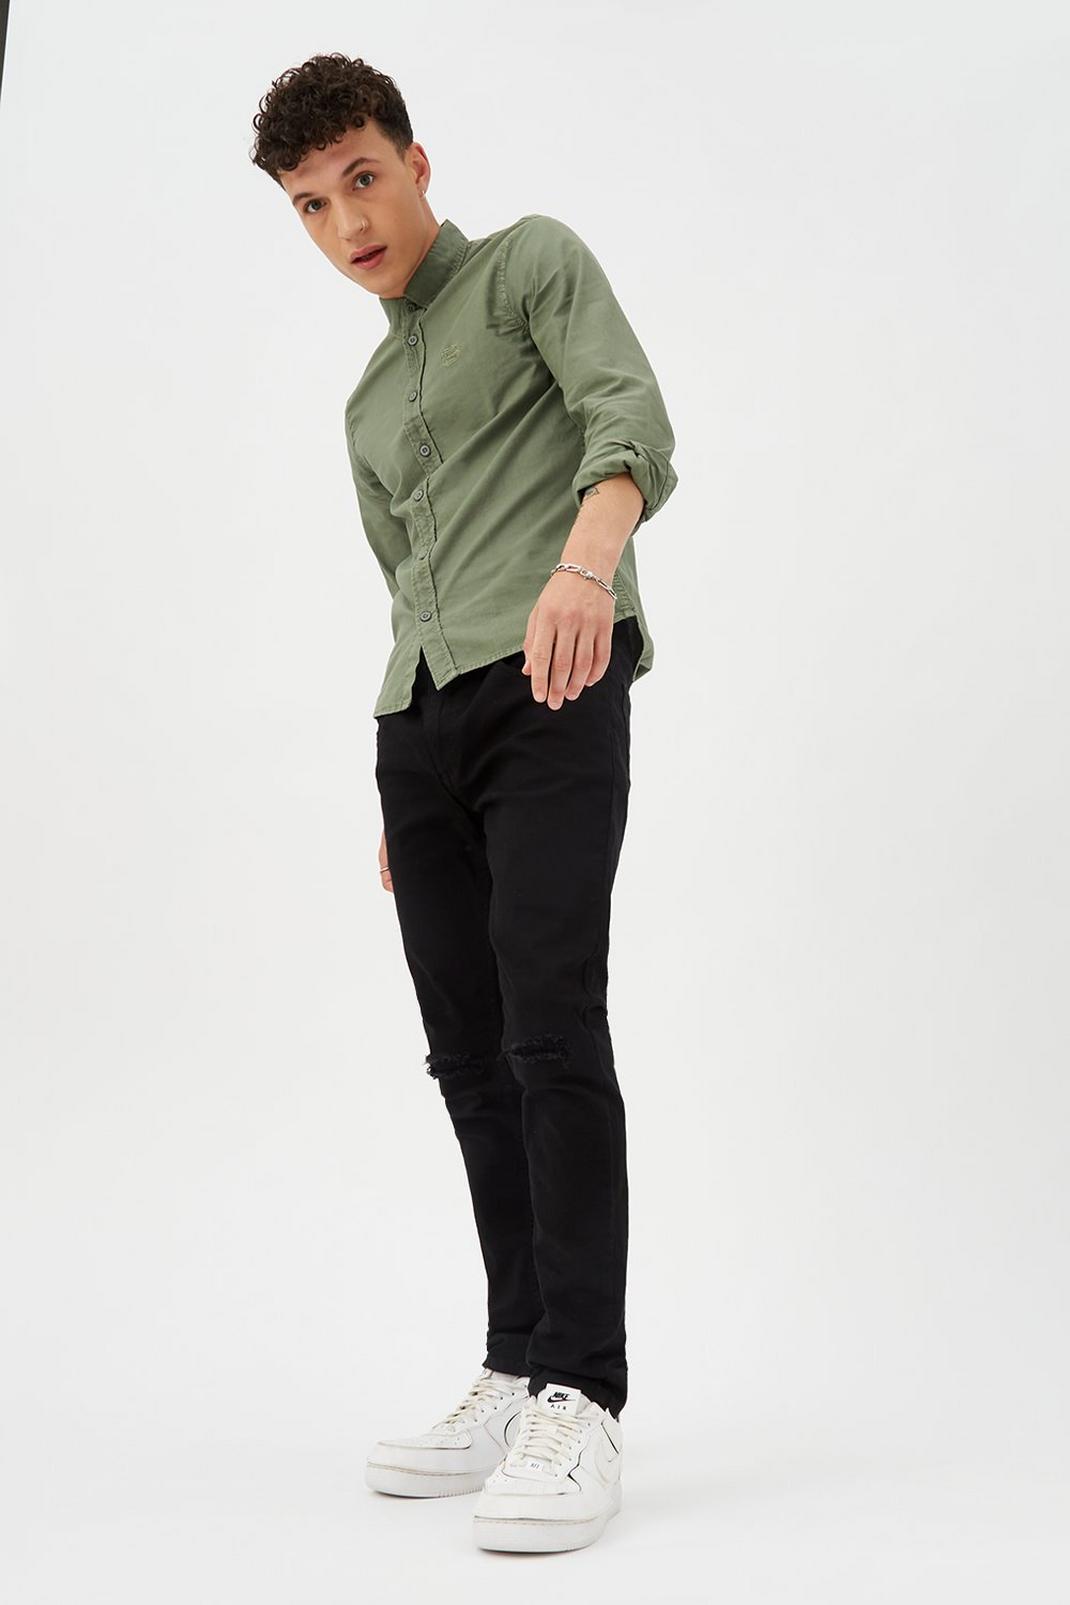 130 Long Sleeve Skinny Fit Garment Dyed Oxford image number 2